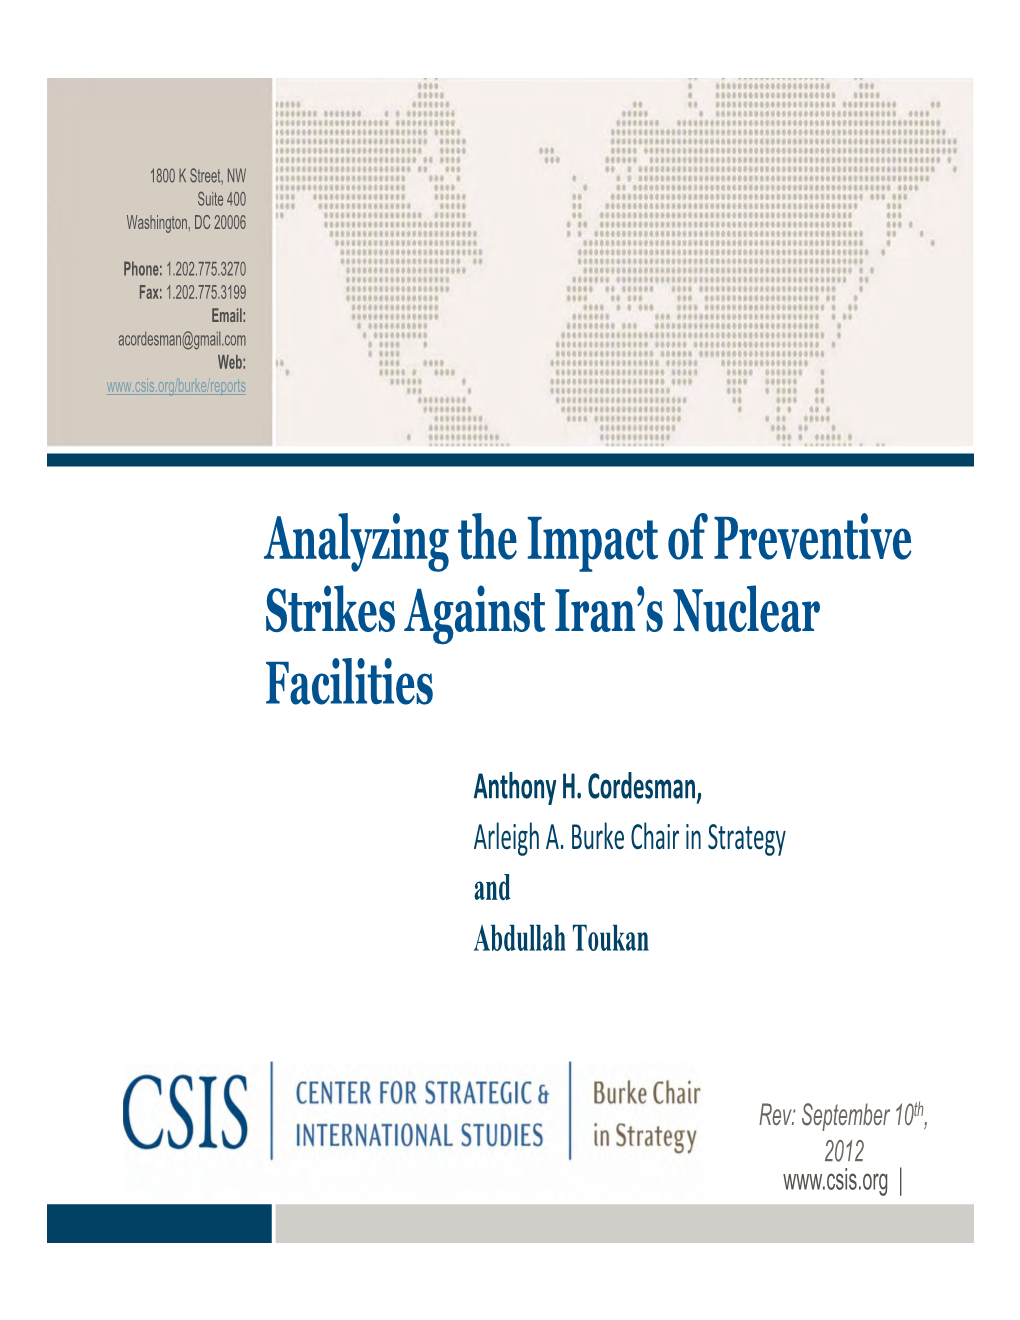 Analyzing the Impact of Preventive Strikes Against Iran's Nuclear